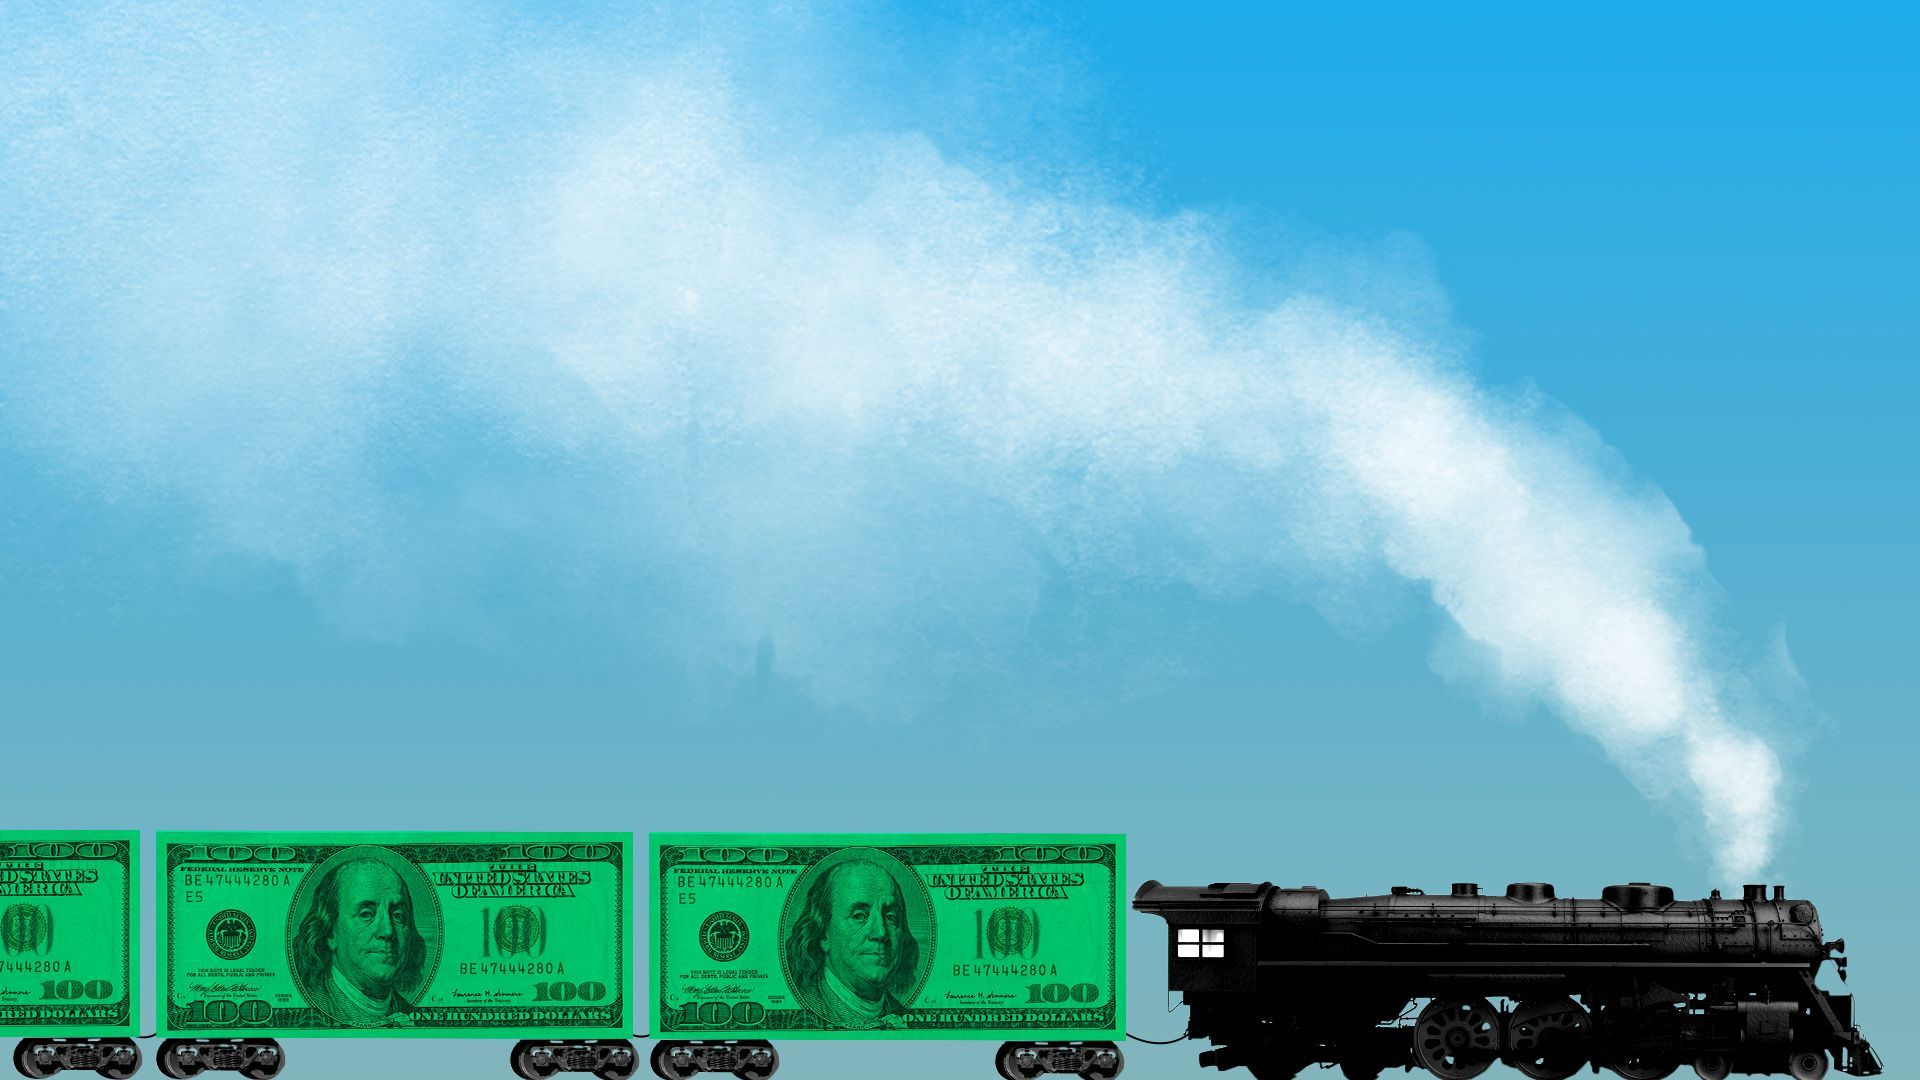 Illustration of a train with freight cars made of hundred dollar bills. 